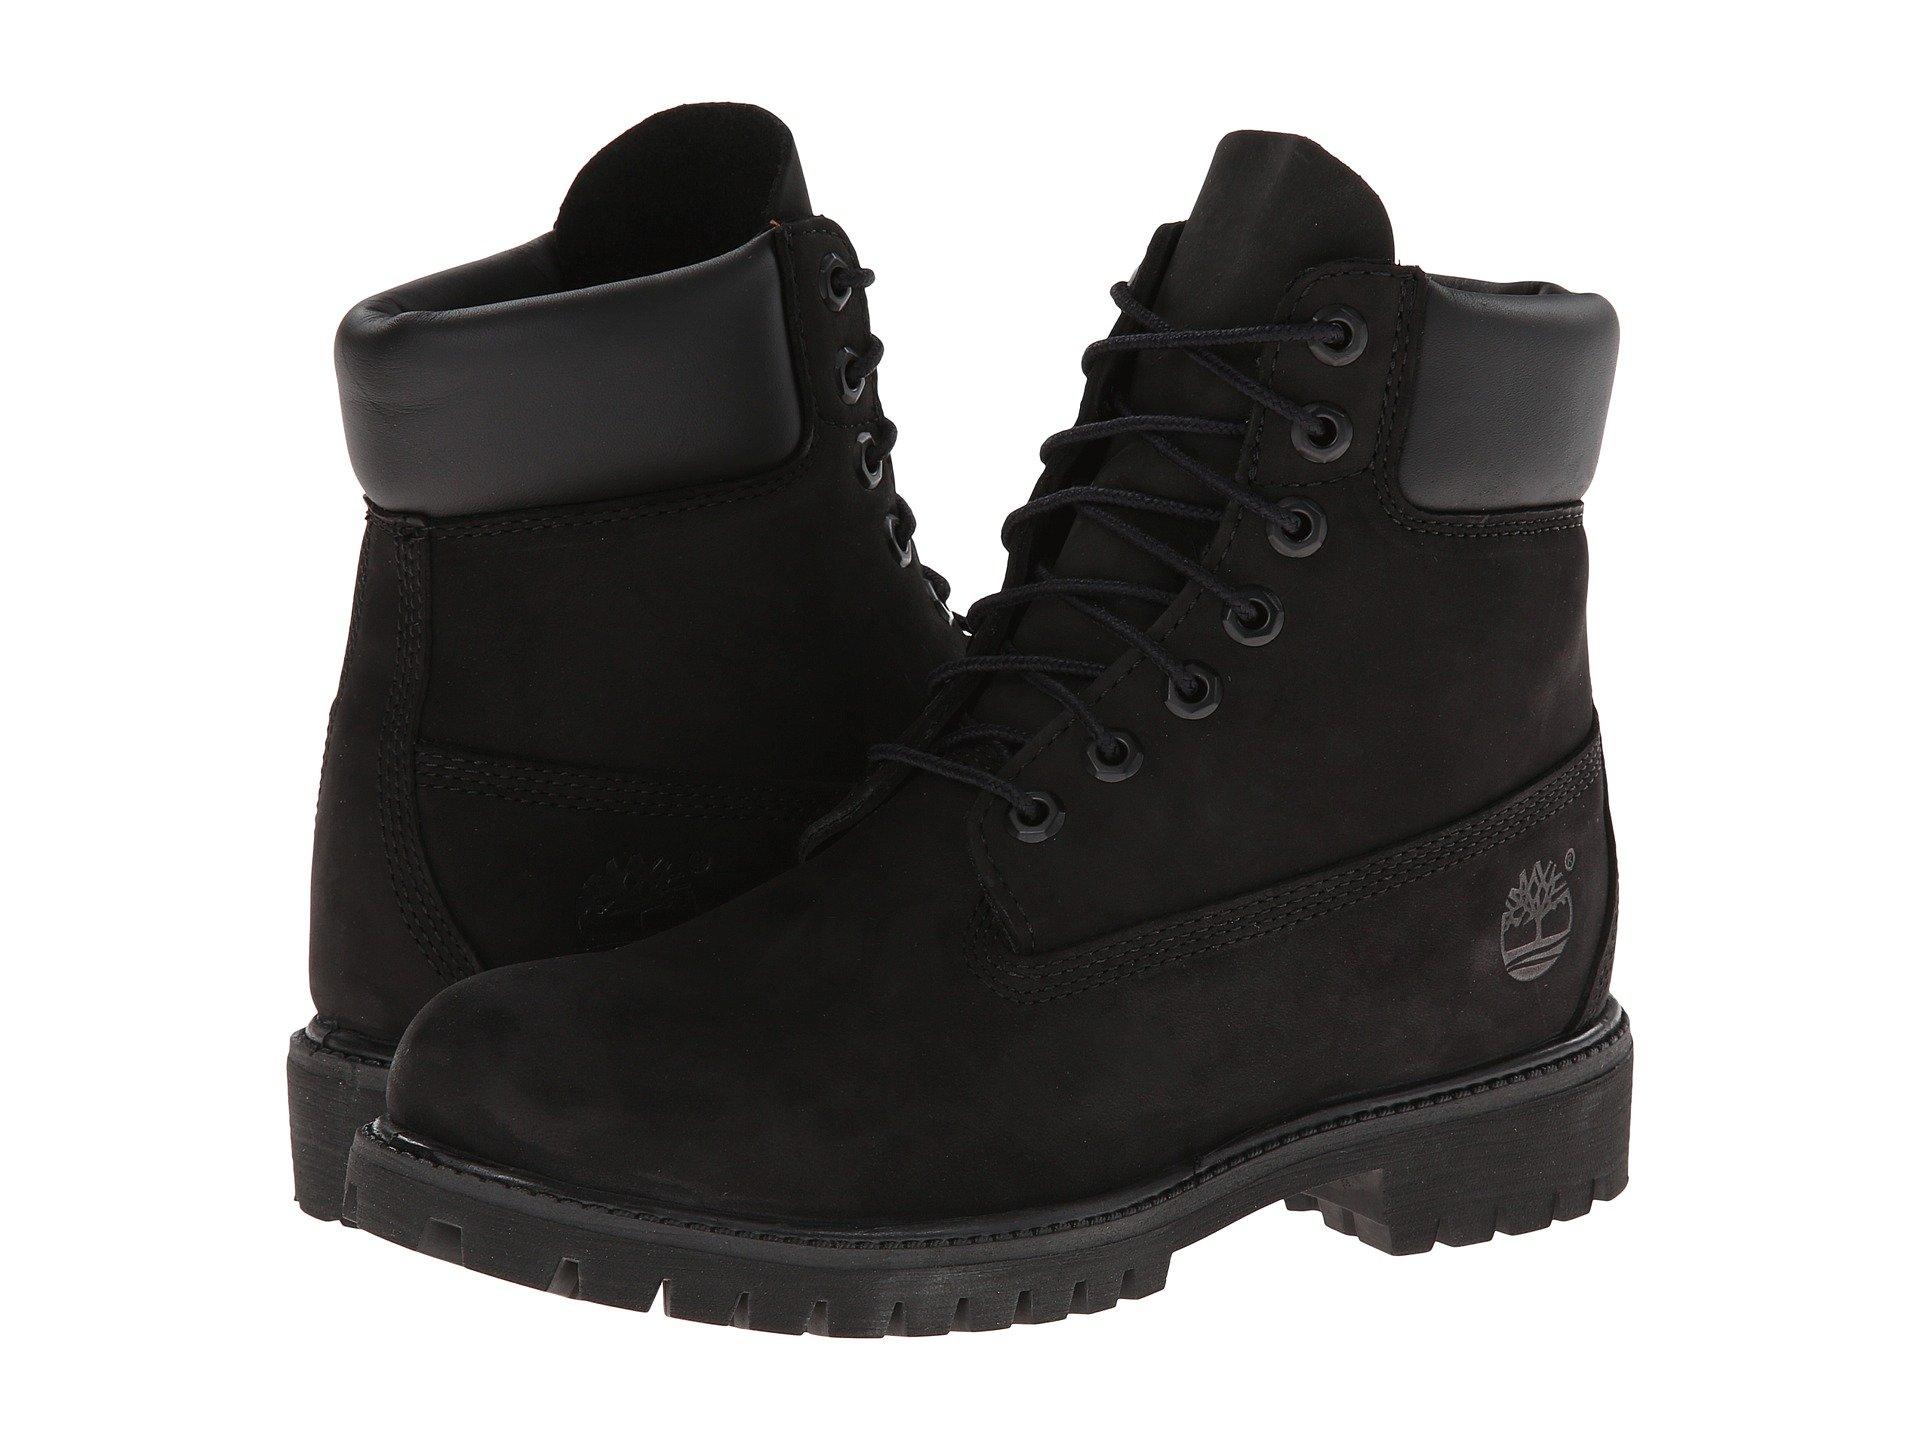 Timberland Leather Classic 6" Premium Boot in Black for Men - Lyst